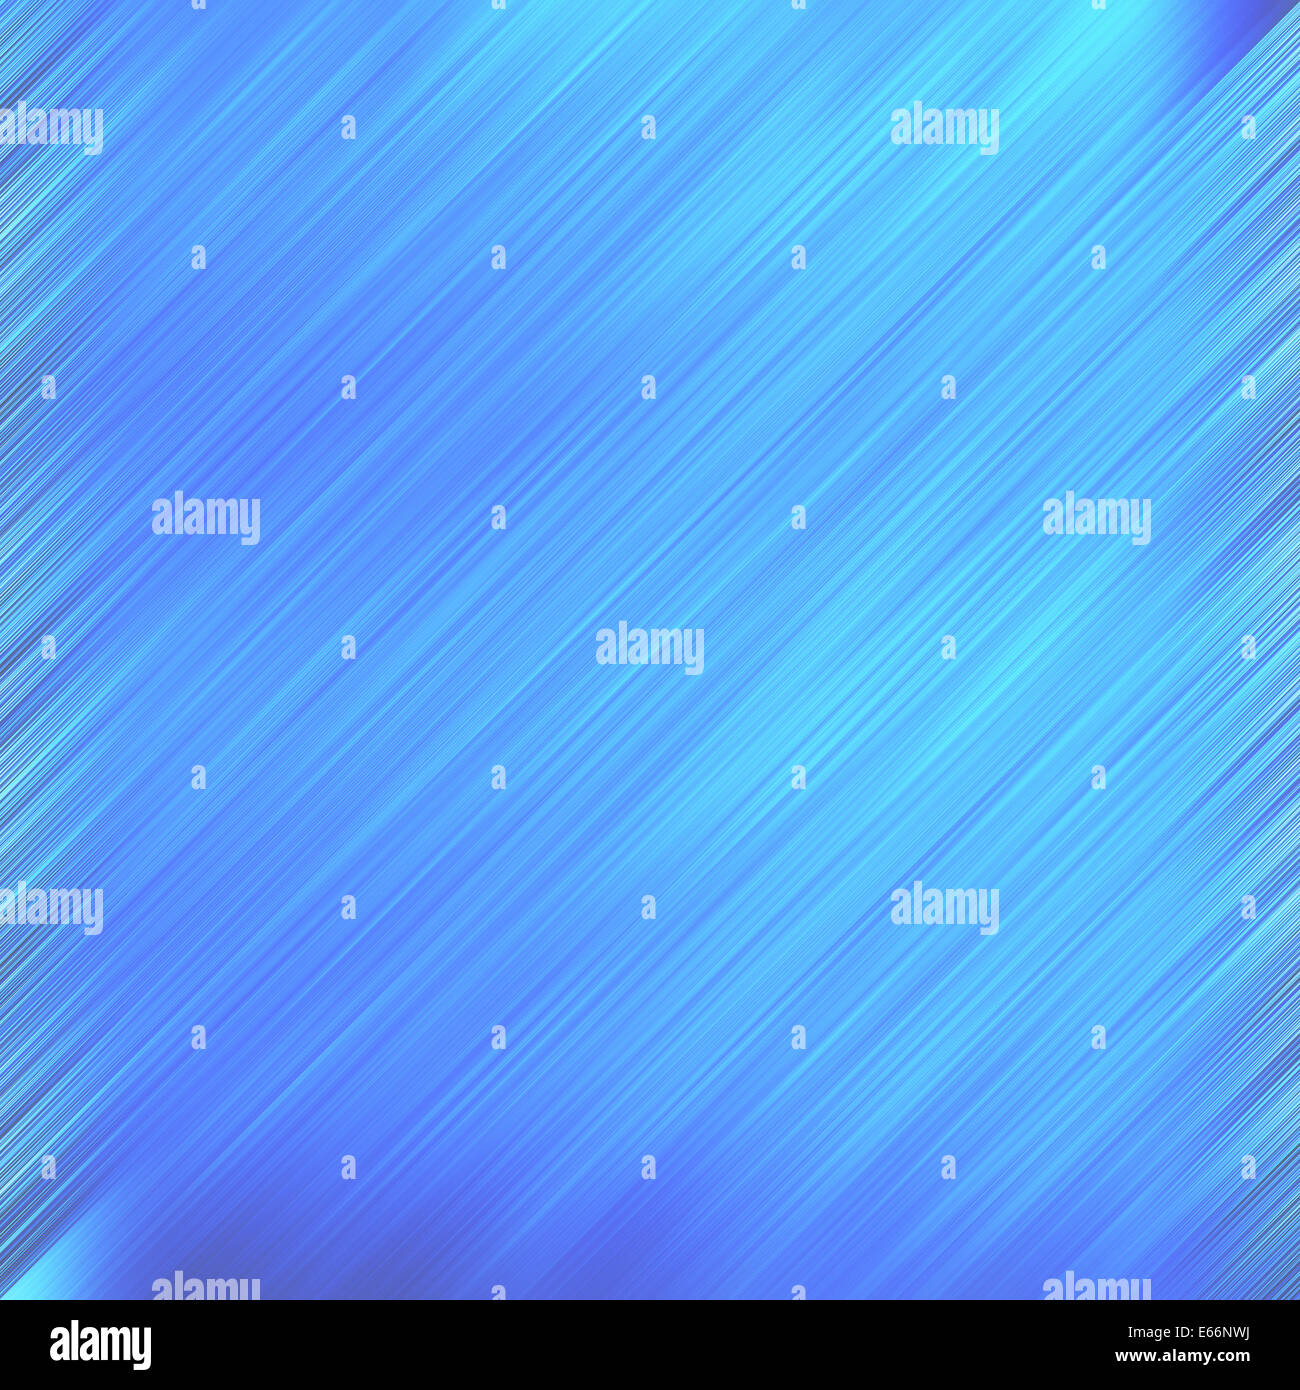 blue abstract background, diagonal lines Stock Photo